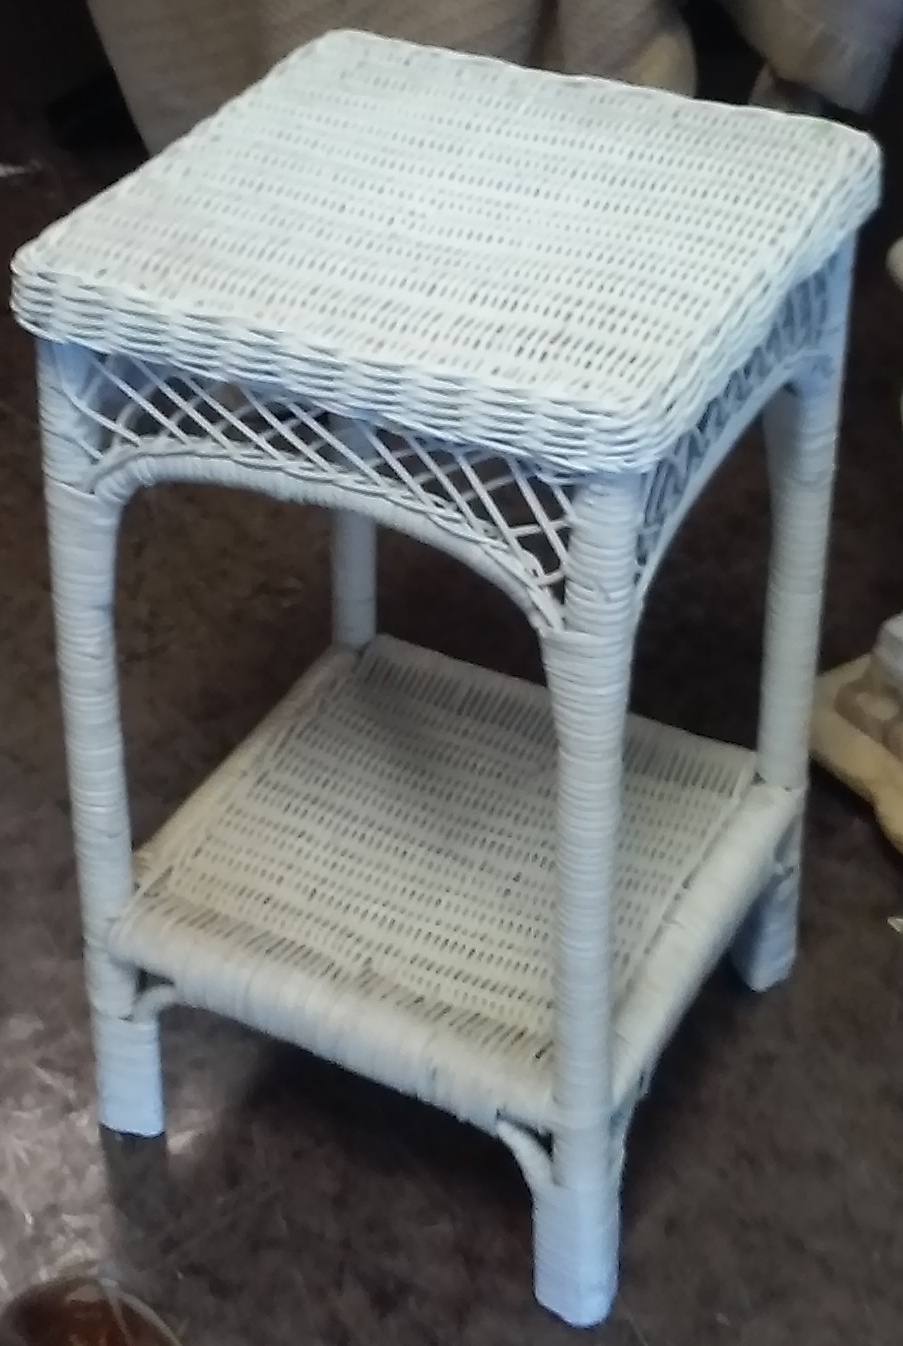 UHURU FURNITURE & COLLECTIBLES: SOLD **REDUCED** White Wicker End Table